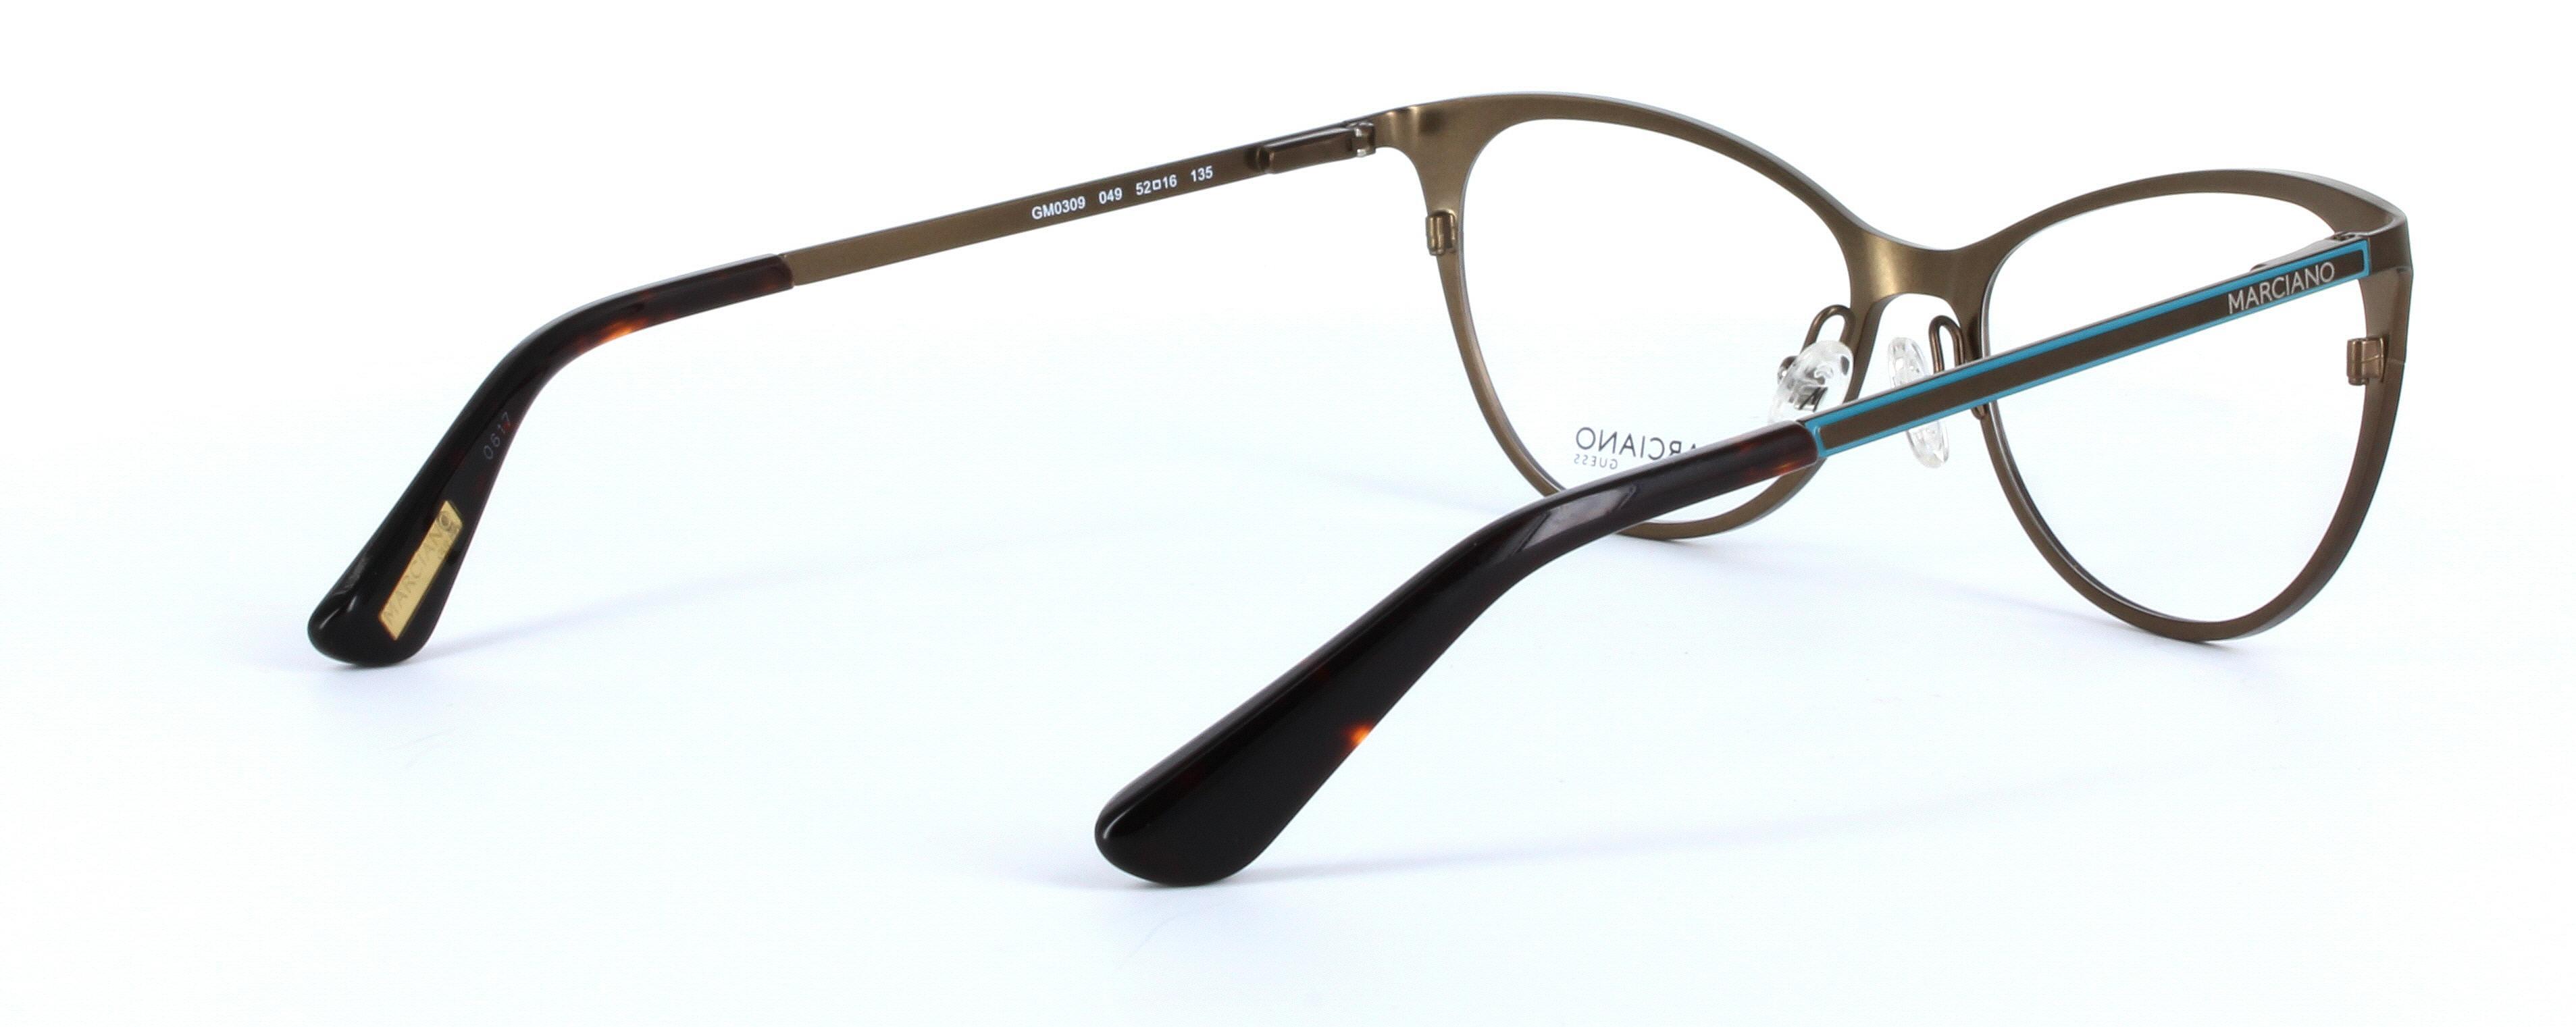 GUESS MARCIANO (GM0309-049) Bronze Full Rim Oval Metal Glasses - Image View 4